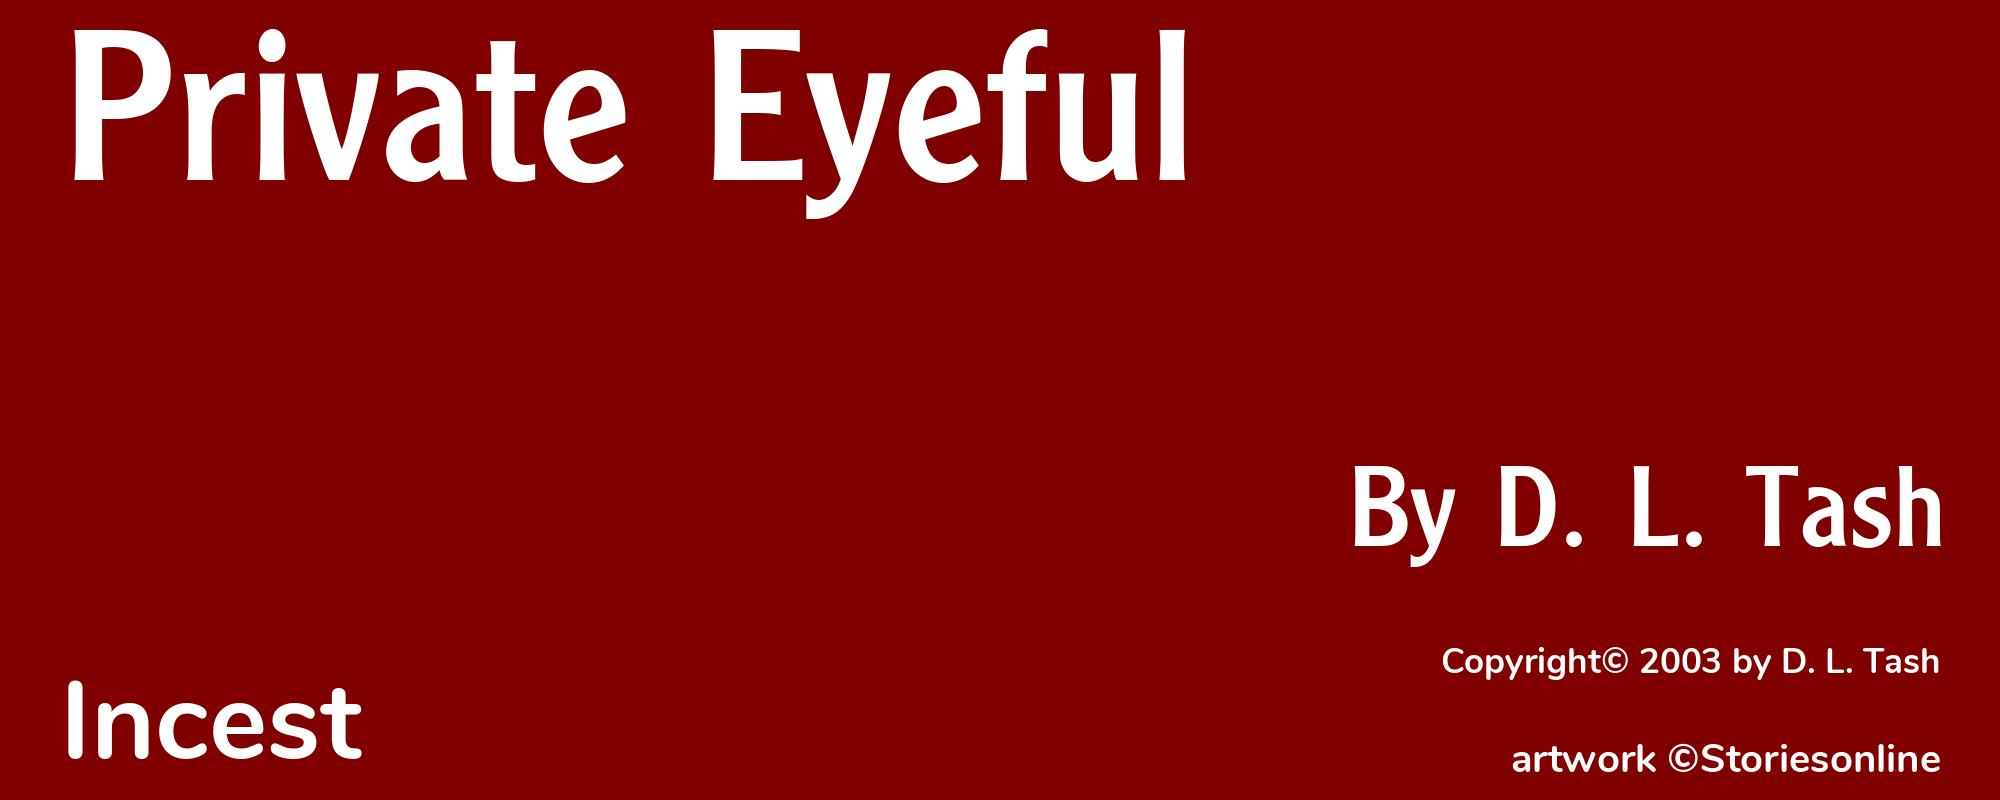 Private Eyeful - Cover